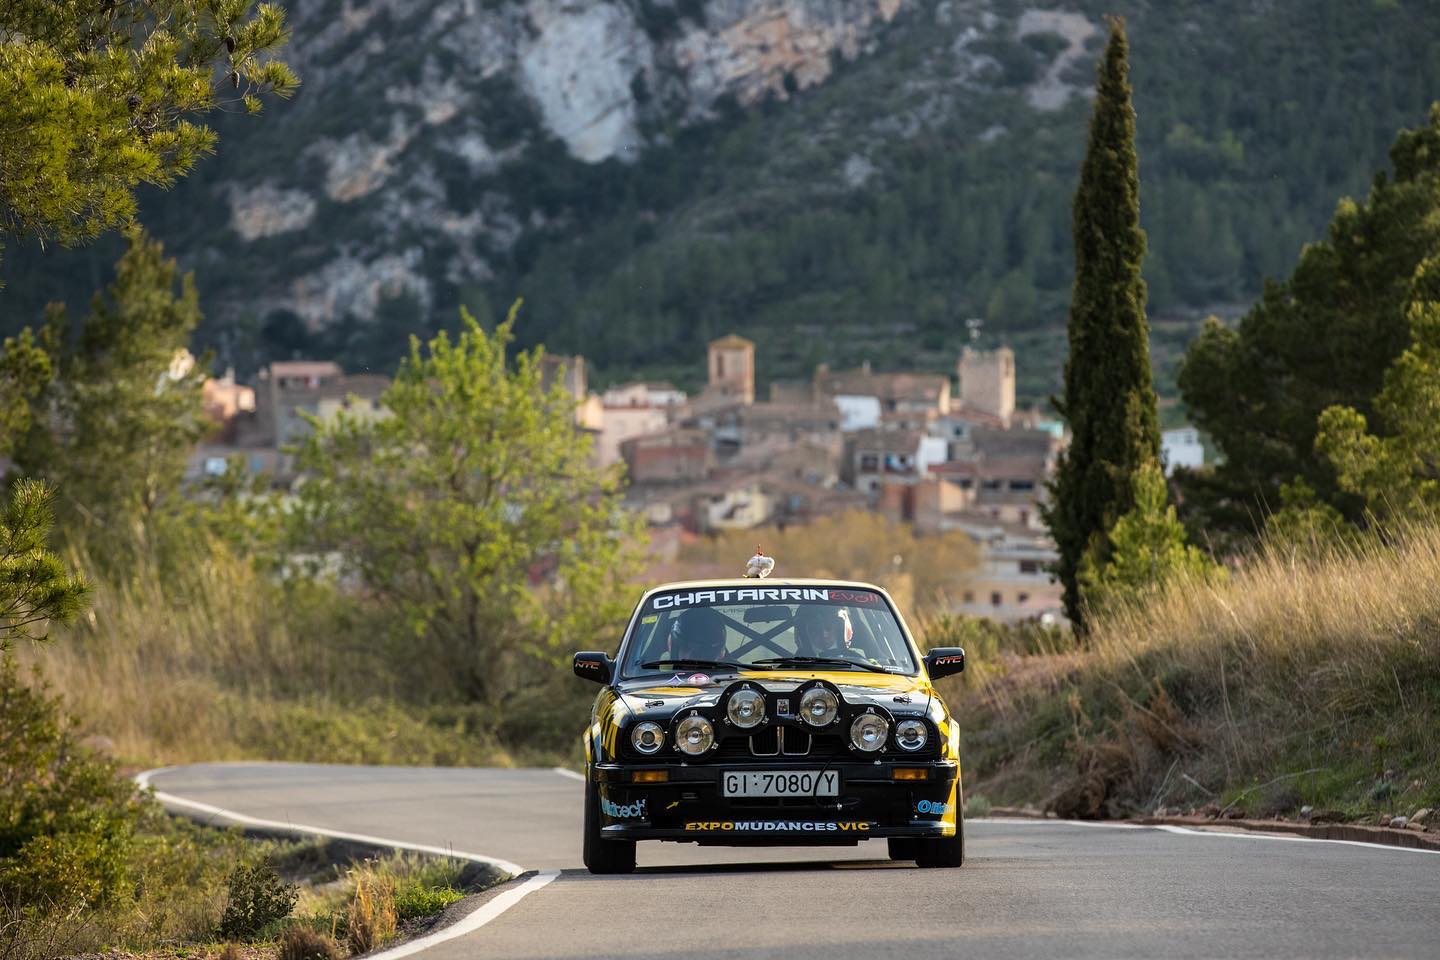 278257034_5297654370291368_1741669881677347395_n rallyes clasicos